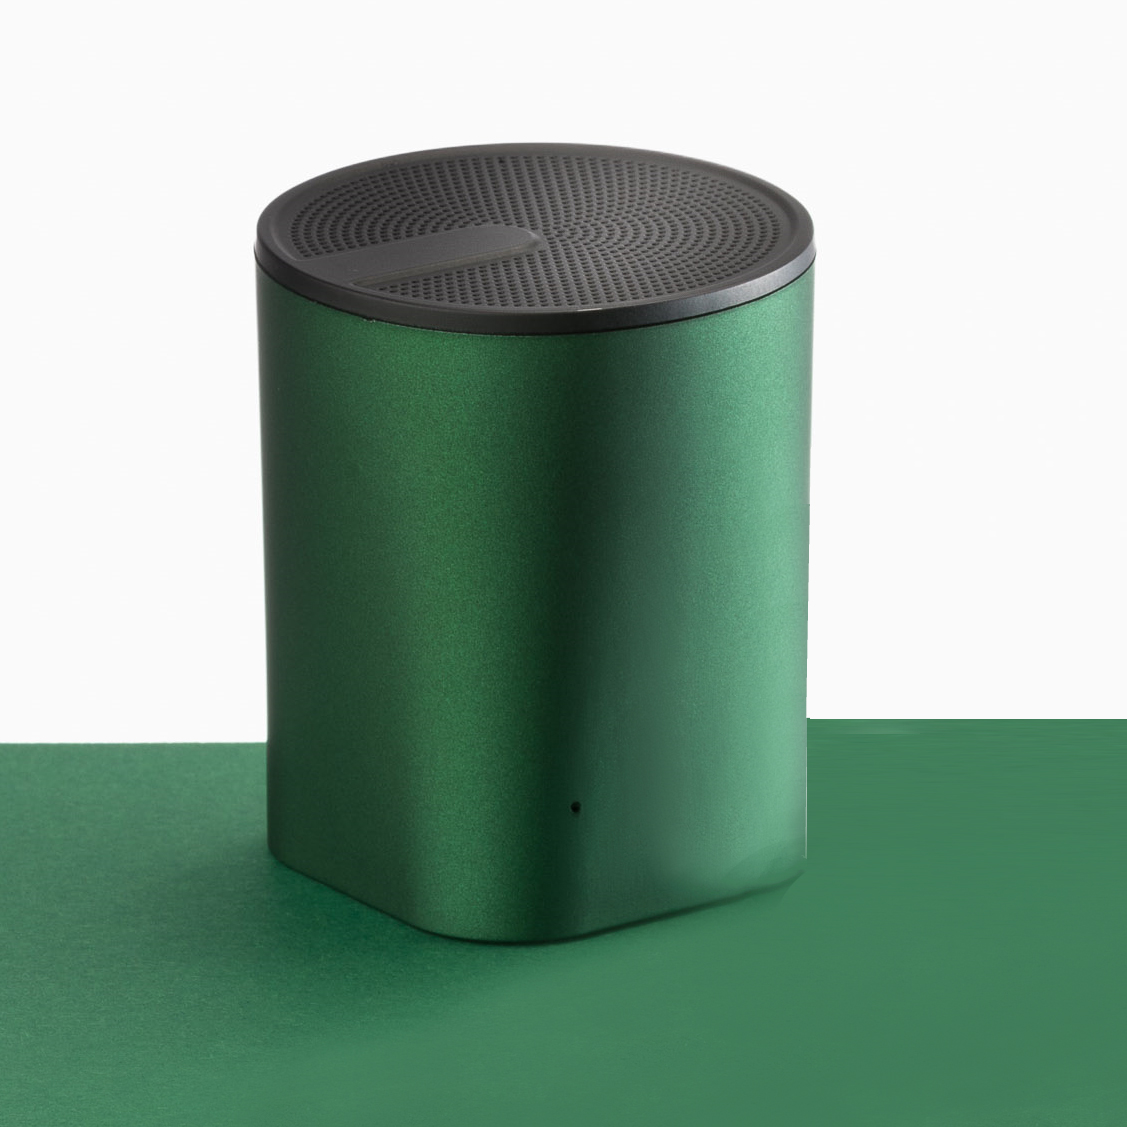 Green Colour Sound Compact Speaker